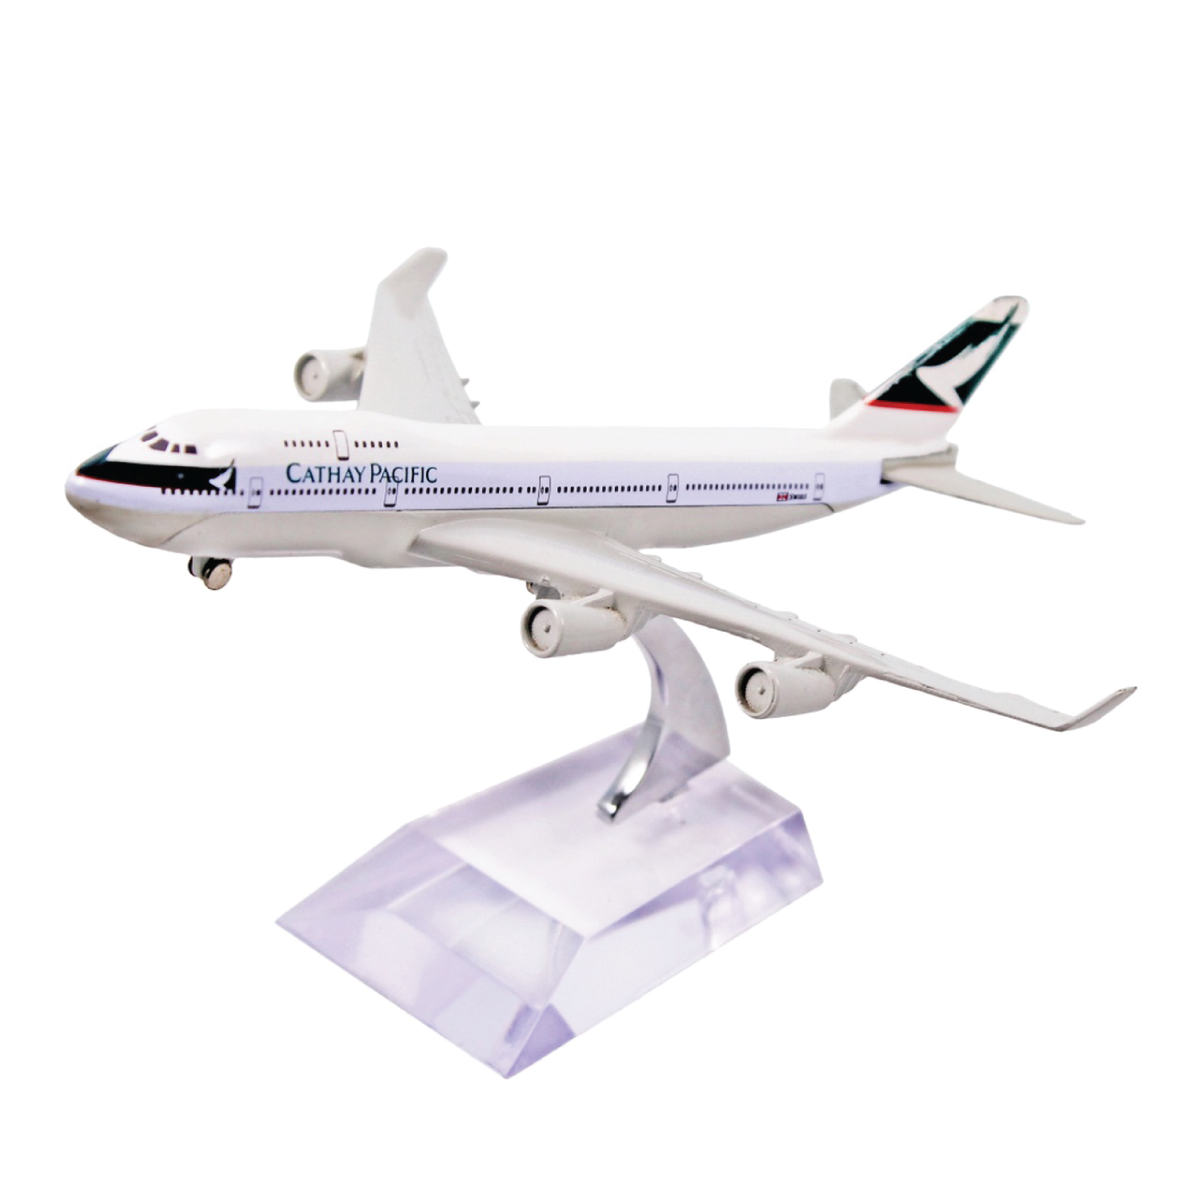 Aircraft Model Small Cathay Pacific - For Office Use, Personal Use, or Corporate Gifting